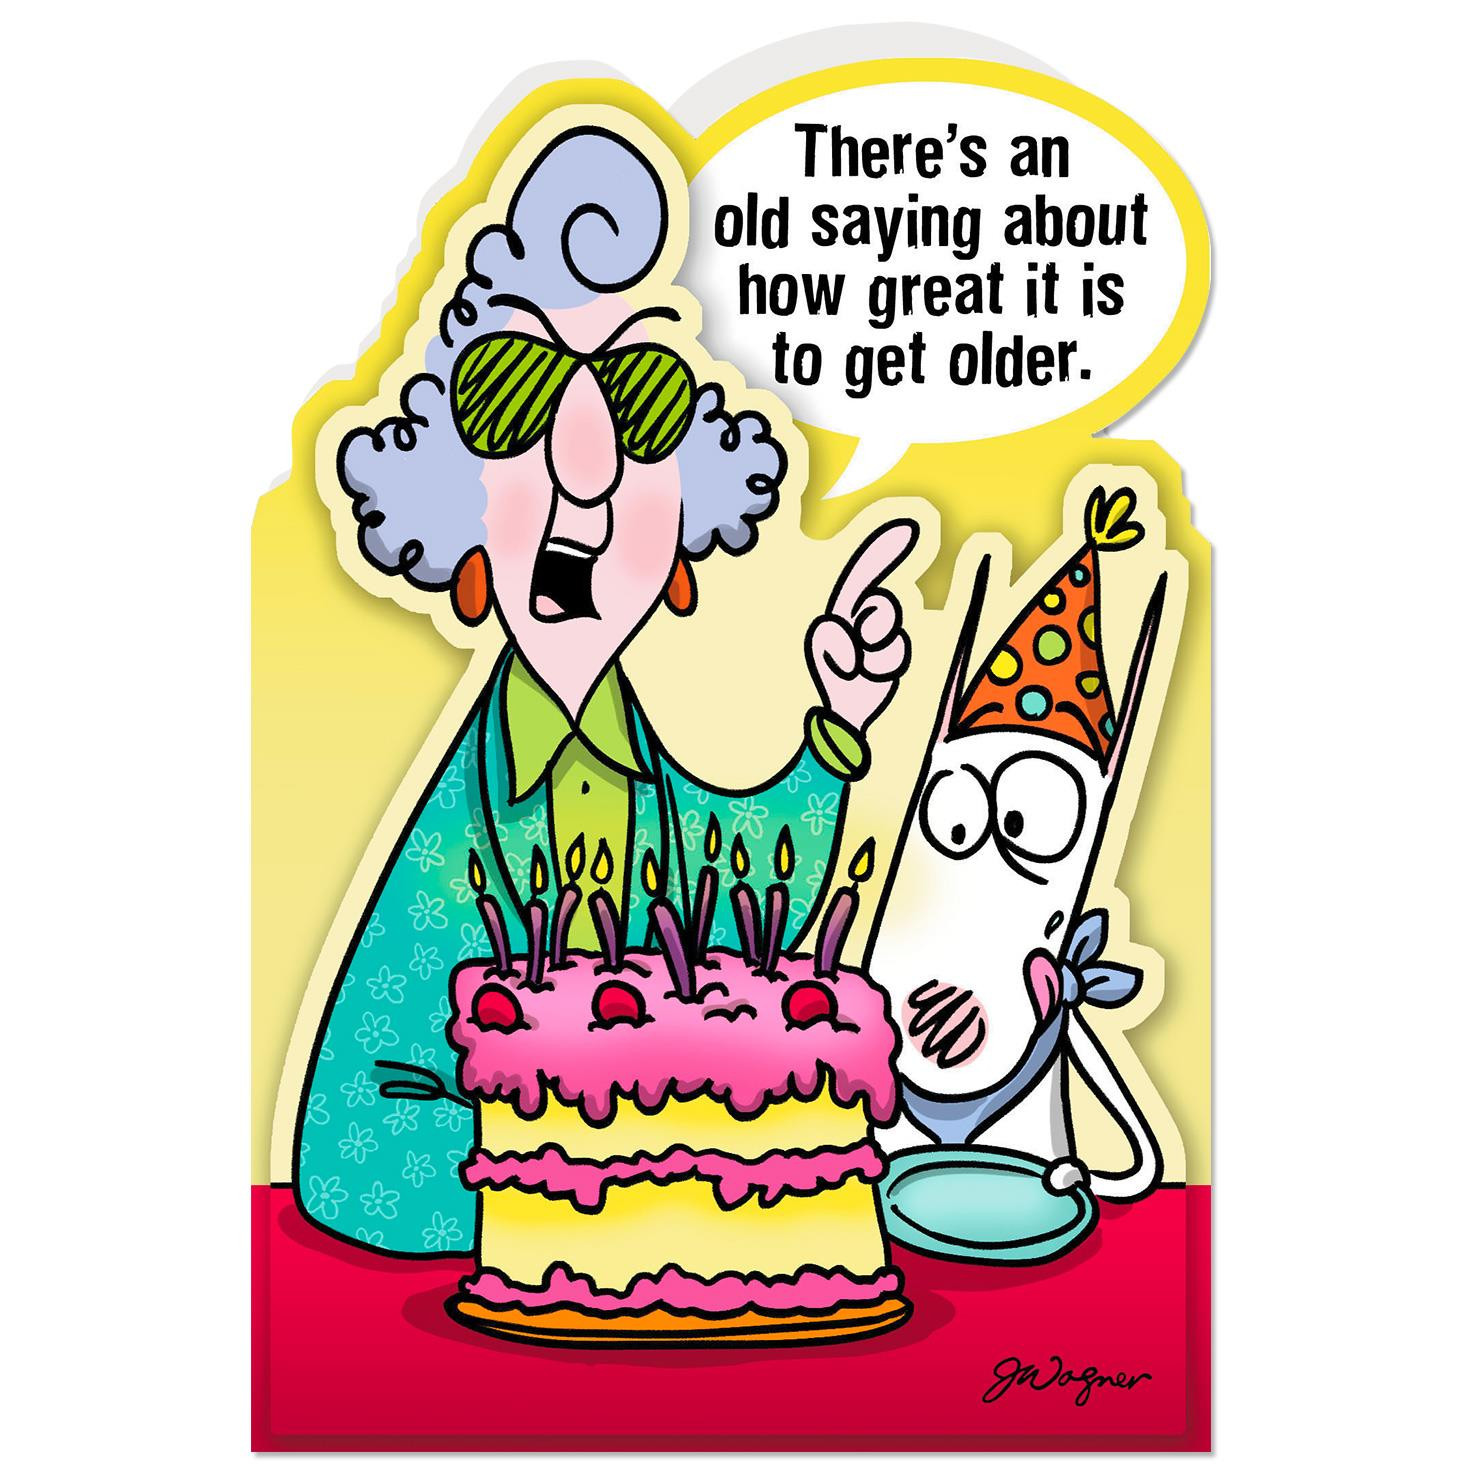 Funny Old Lady Birthday Cards
 Maxine™ Great to Get Older Funny Birthday Card Greeting